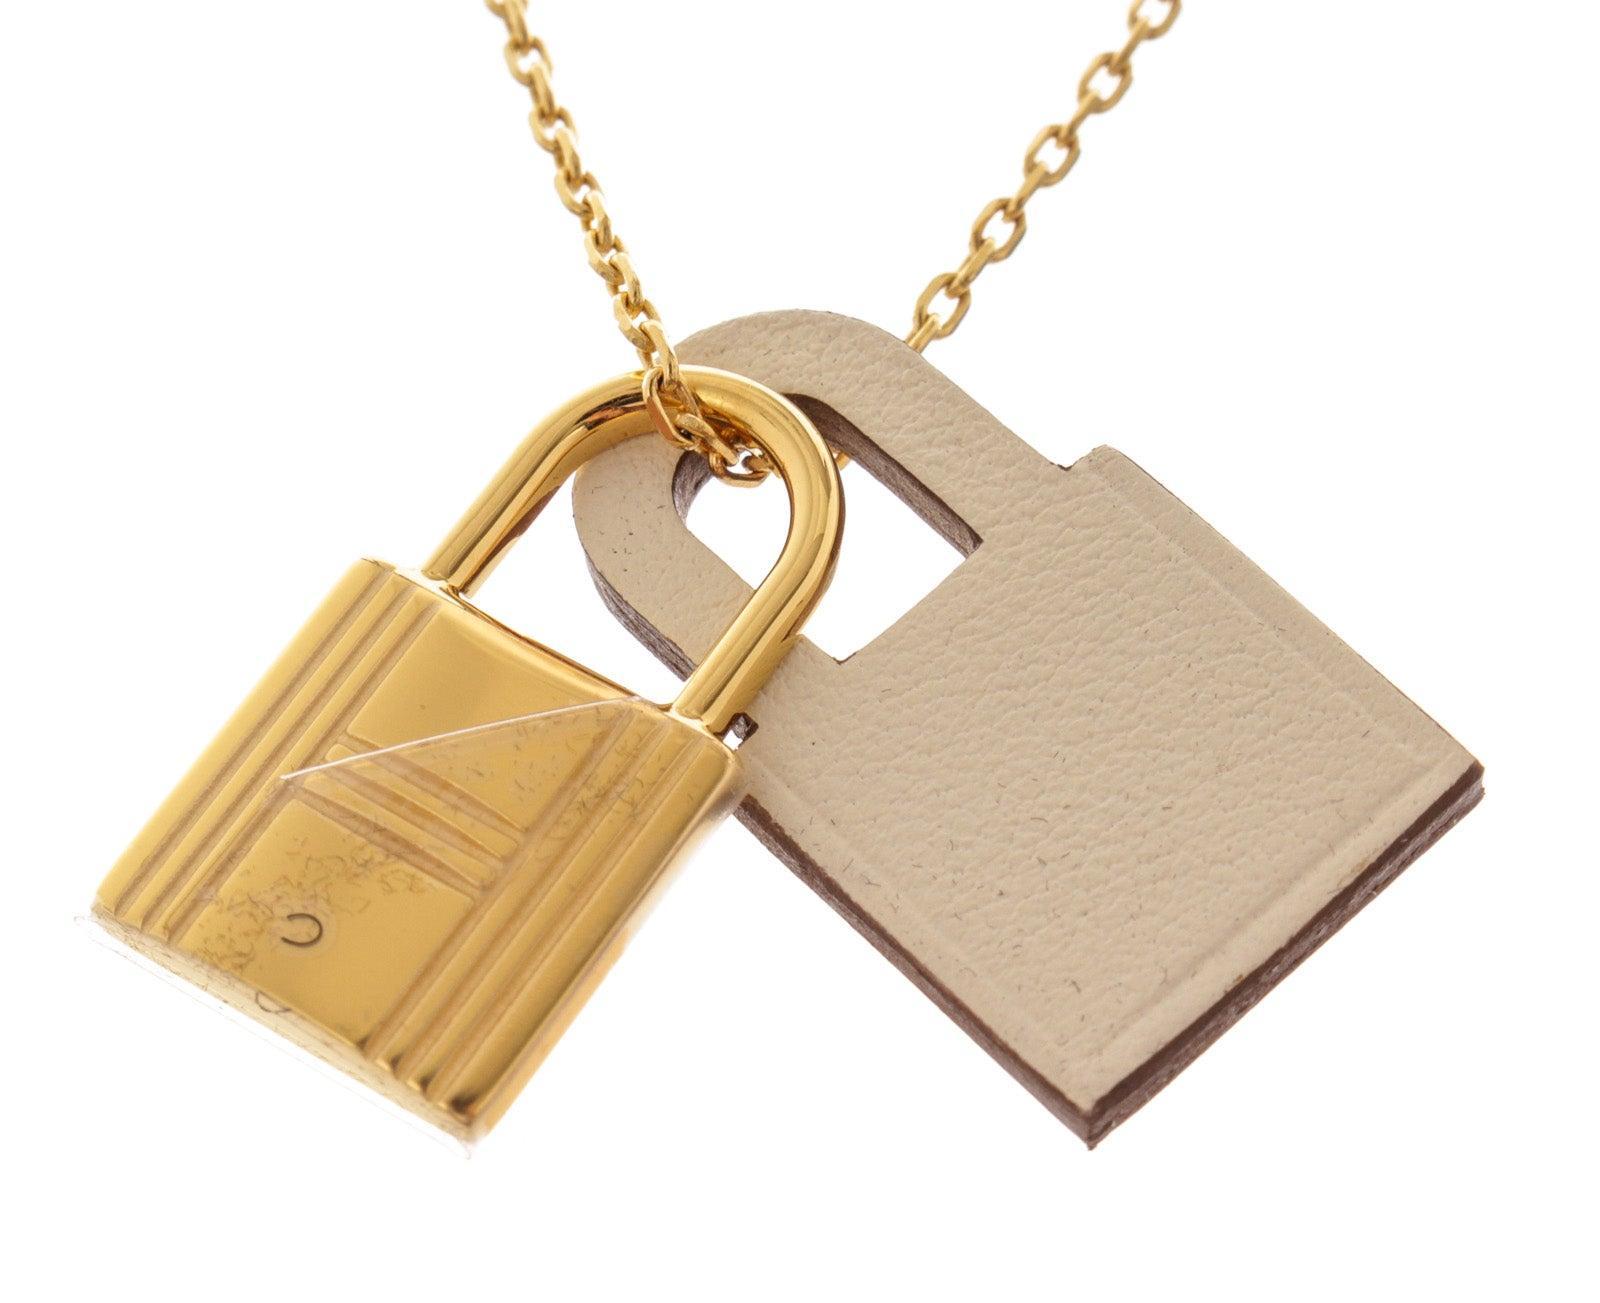 Hermes long necklace with Pendant in Swift with gold-plated hardware. The O'Kelly line gives pride of place to the eponymous bag padlock. Here, it's streamlined and attached to a stylish leather padlock that follows like a shadow.
 

58174MSC